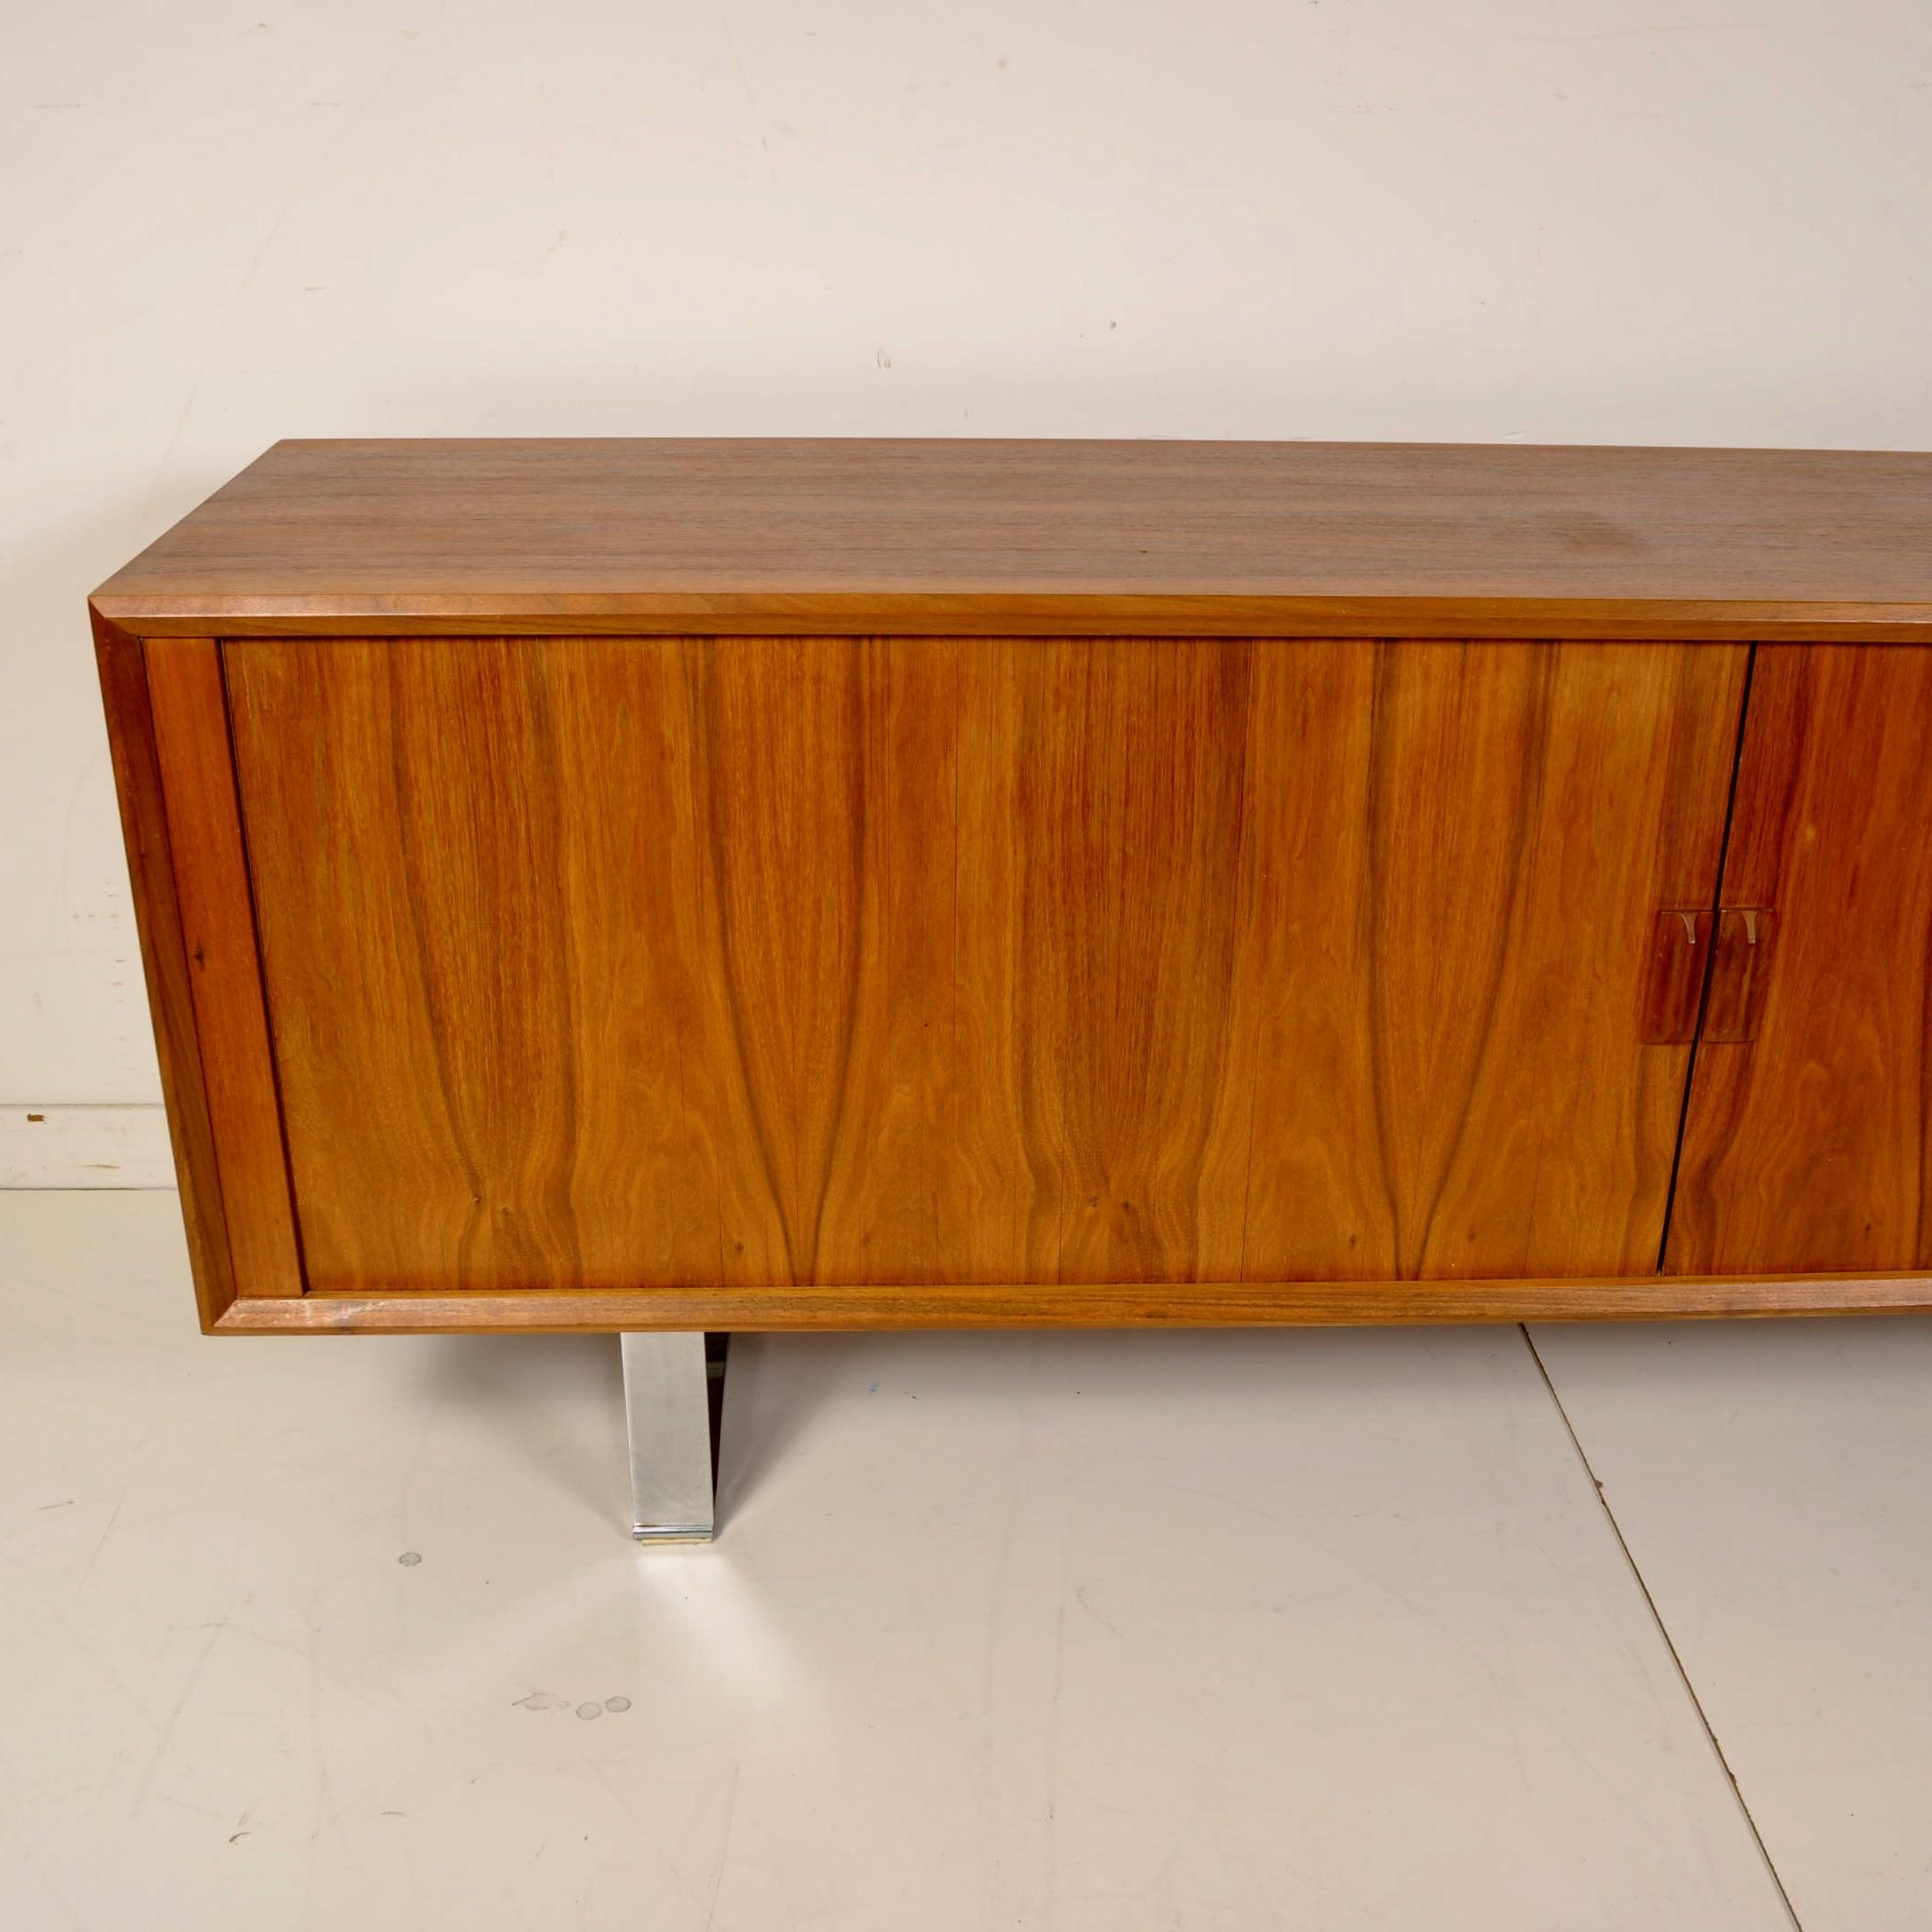 Clean walnut, tambour doored sideboard made in Canada in the 1970s. Finished on all sides and resting on chrome pedestals, this would make a great piece to act as a room divider.